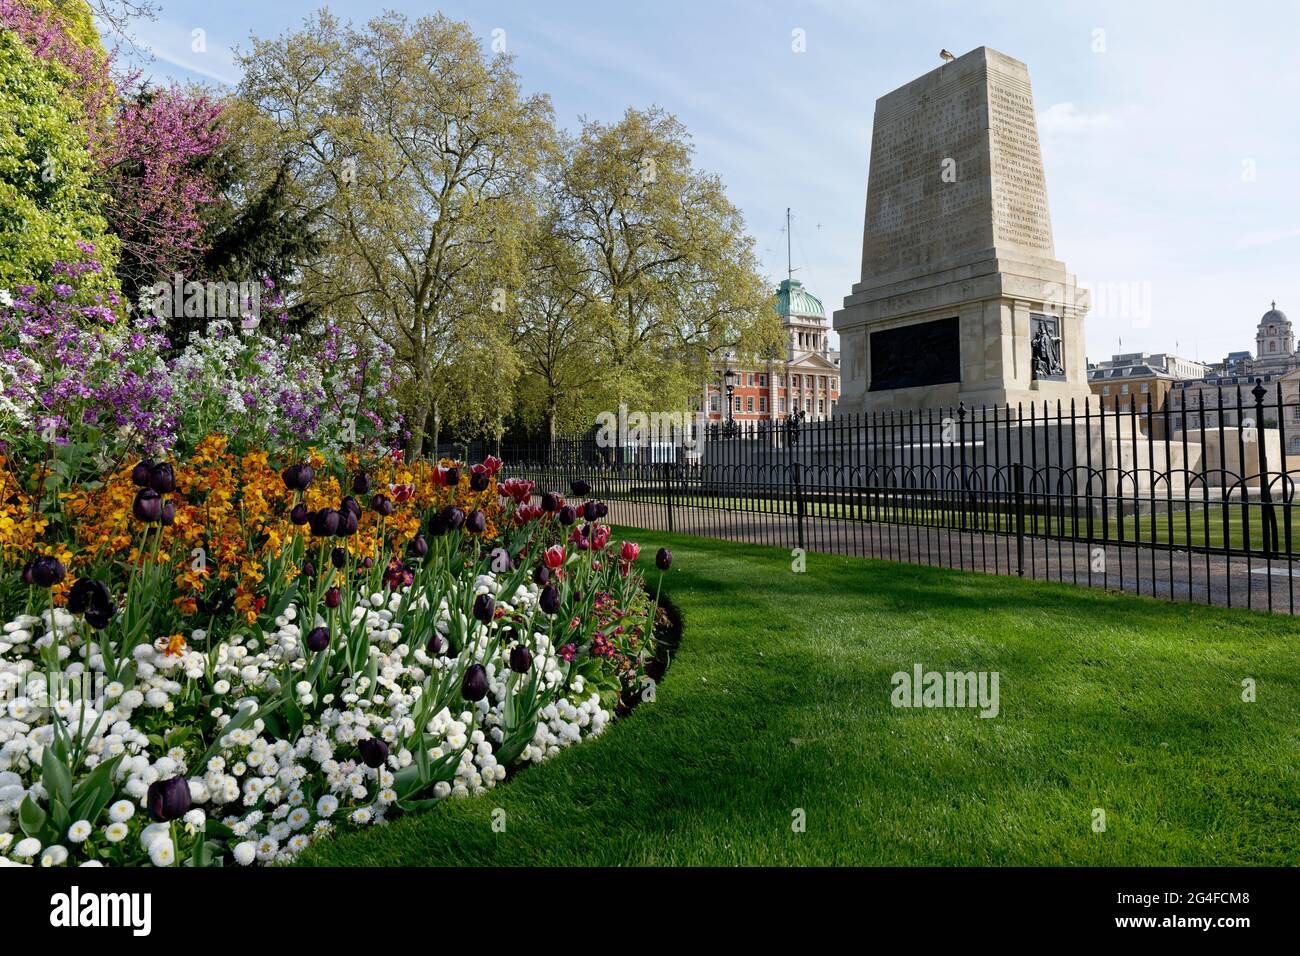 The Guards Memorial a large stone monument to the four British Guards regiments sits at the edge of St James's Park next to Horse Guards Parade Stock Photo